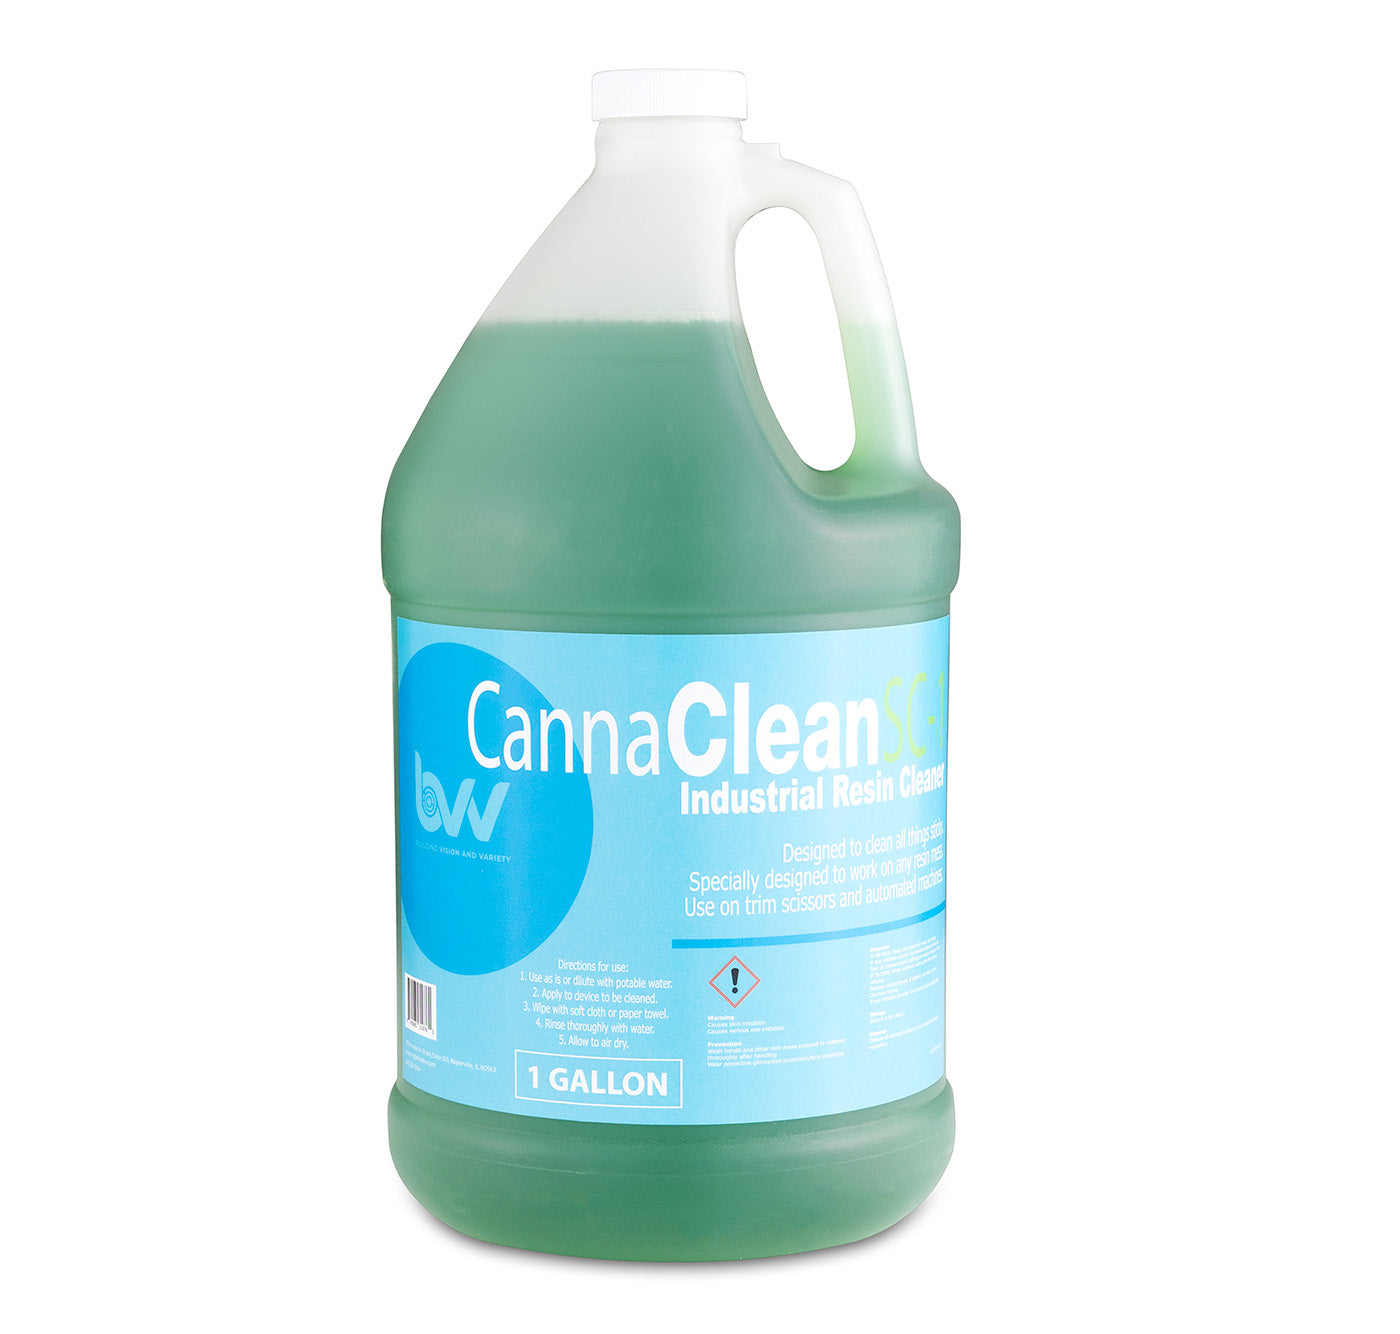 BVV CannaClean SC-1 Industrial Resin Cleaner Concentrate